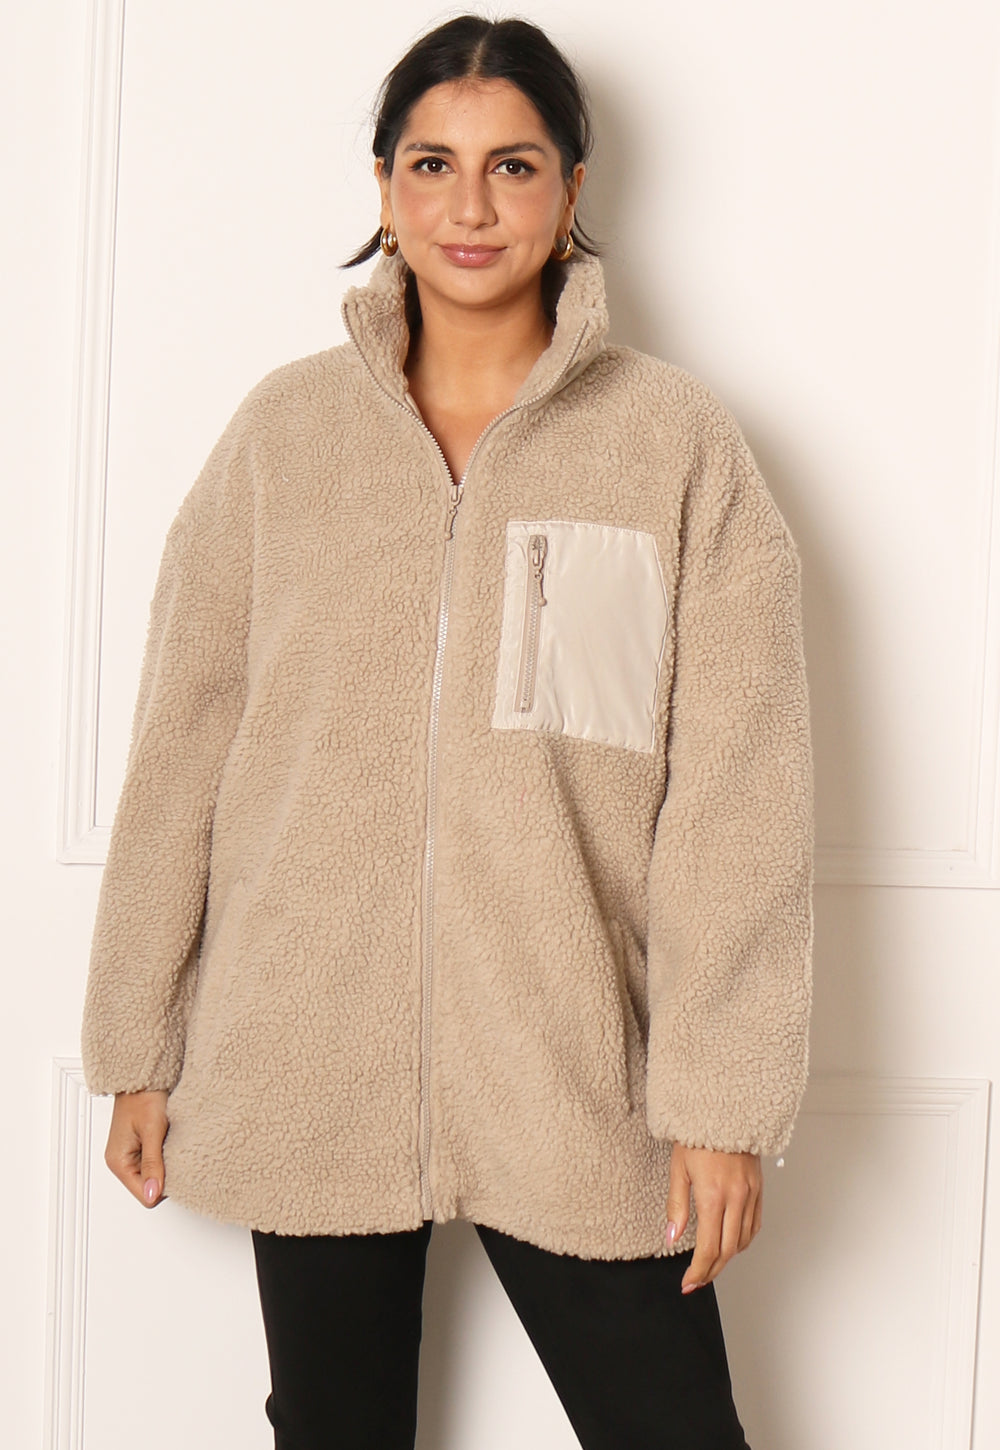 ONLY Tracy Teddy Fleece Zip Through Jacket in Beige  One Nation Clothing  ONLY Tracy Teddy Fleece Zip Through Jacket in Beige